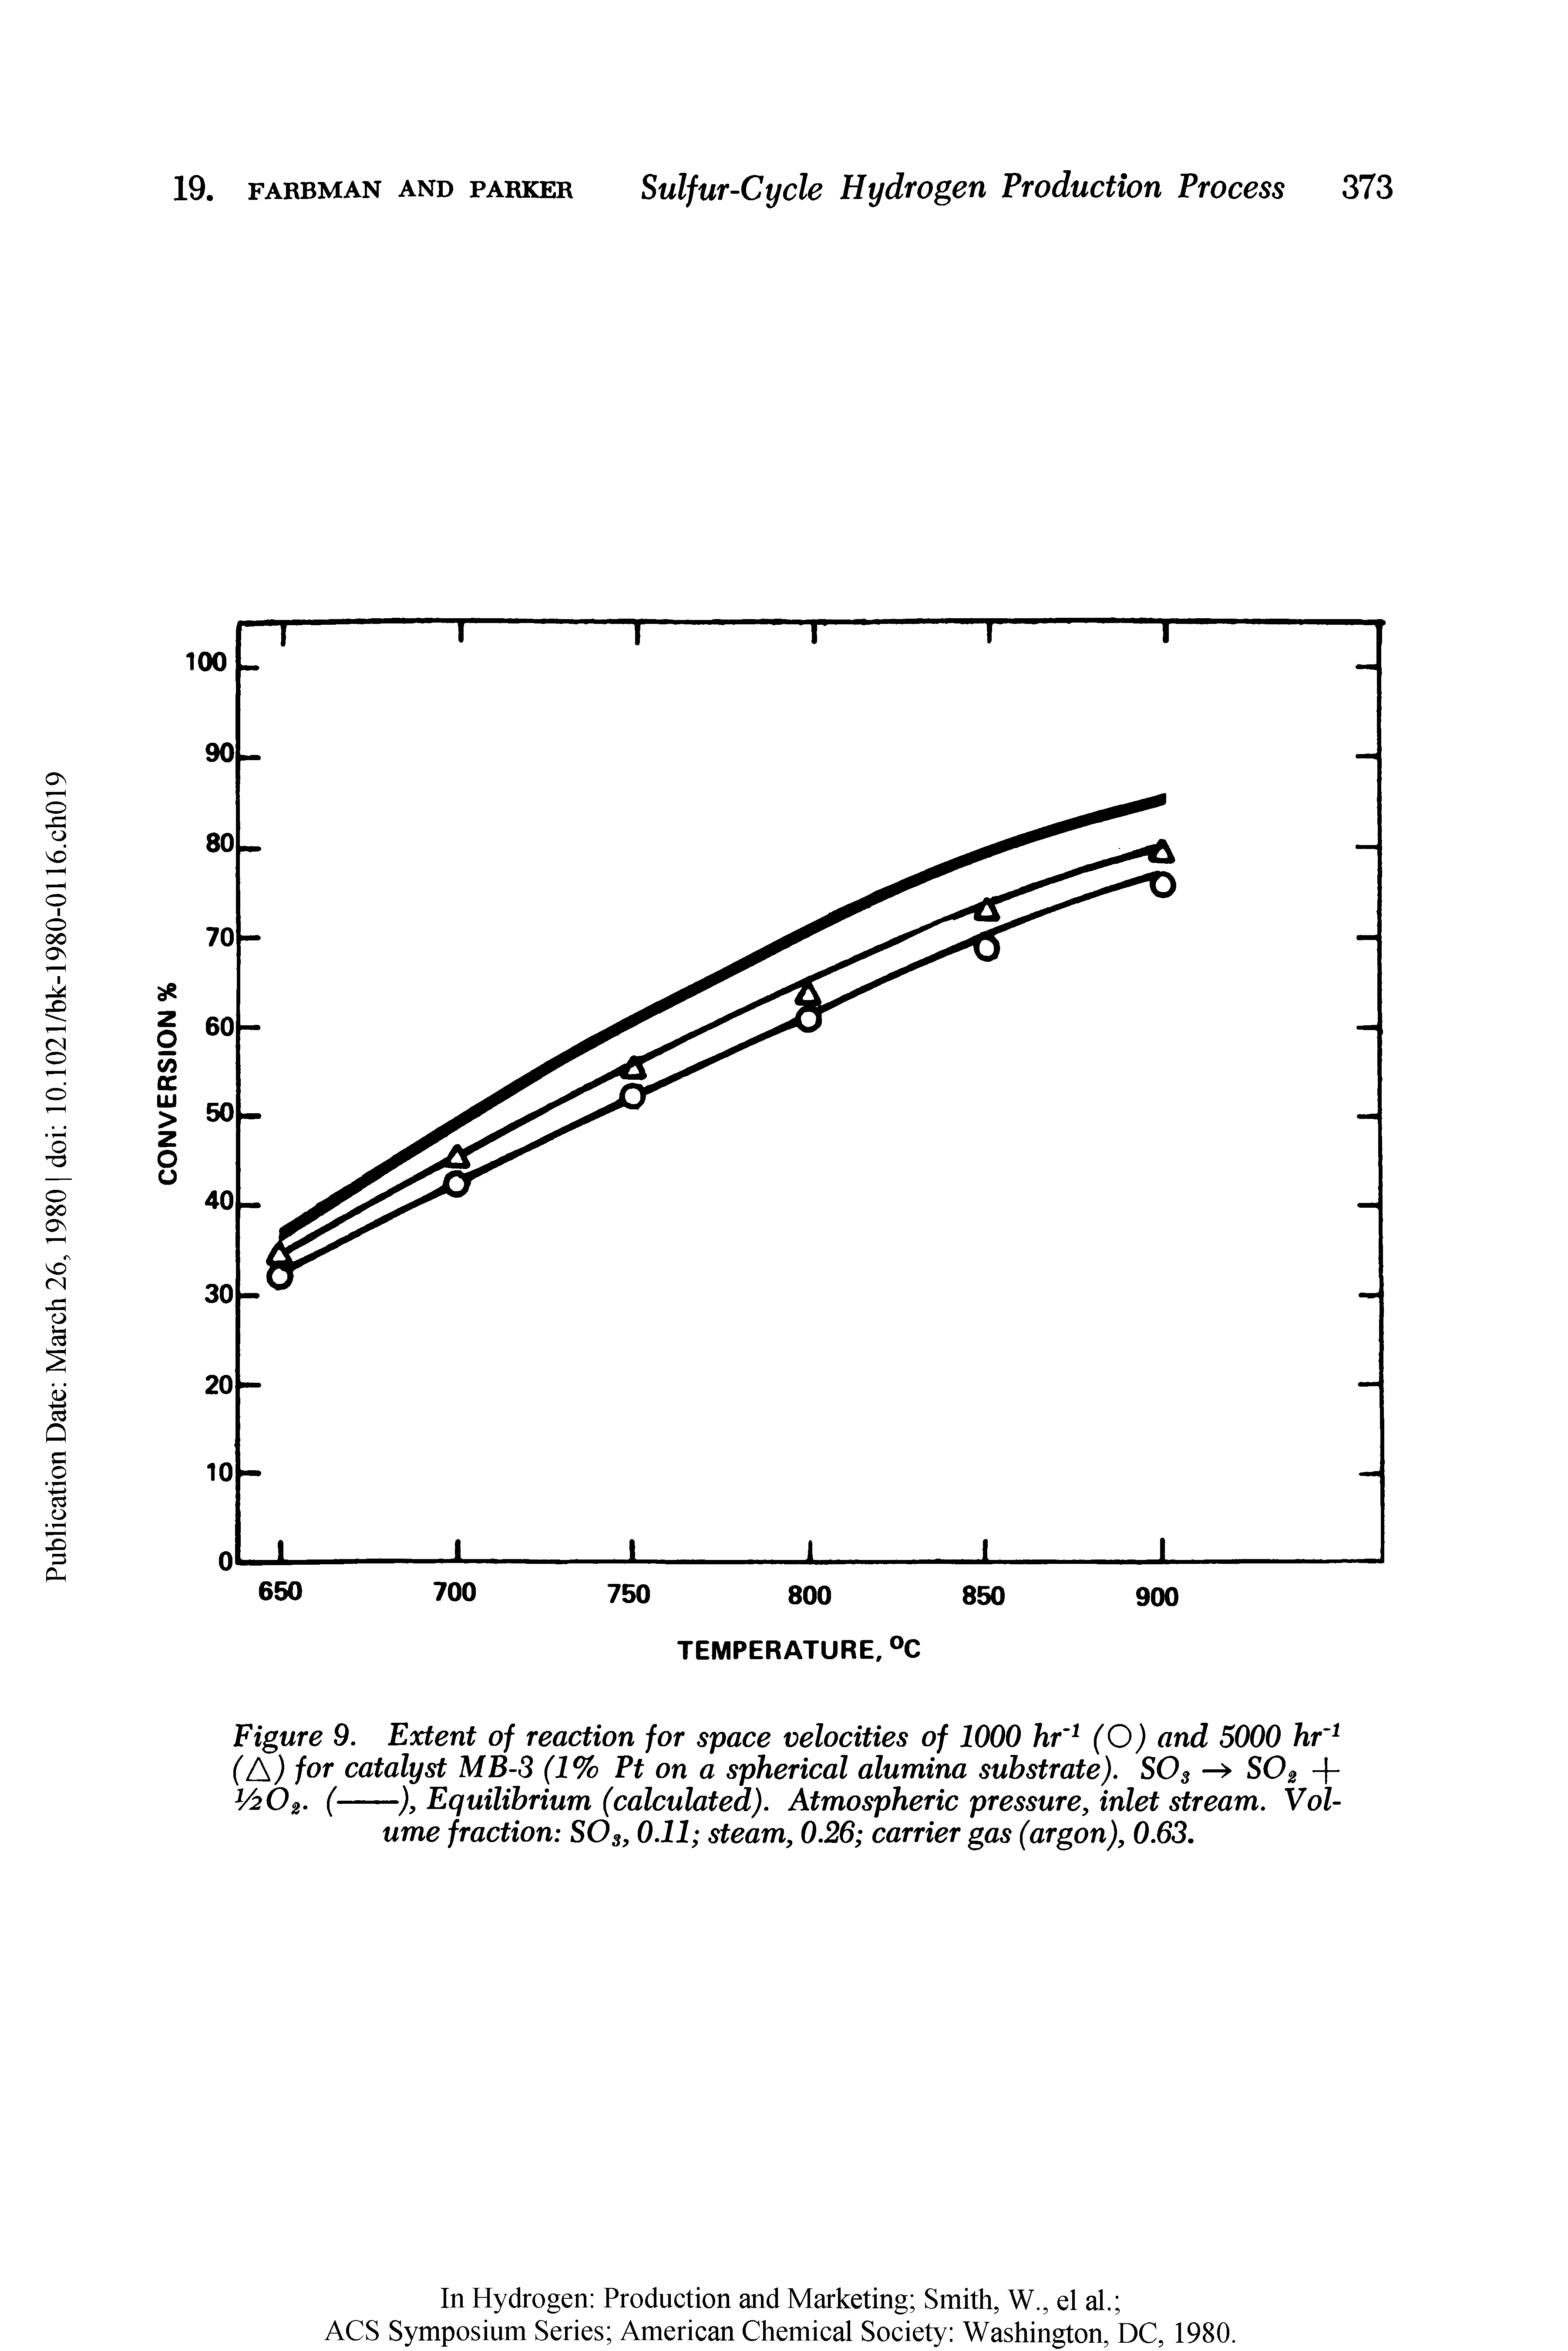 Figure 9. Extent of reaction for space velocities of 1000 hr 1 (O) and 5000 hr 1 (A) for catalyst MBS (1% Pt on a spherical alumina substrate). S03 S02 +...